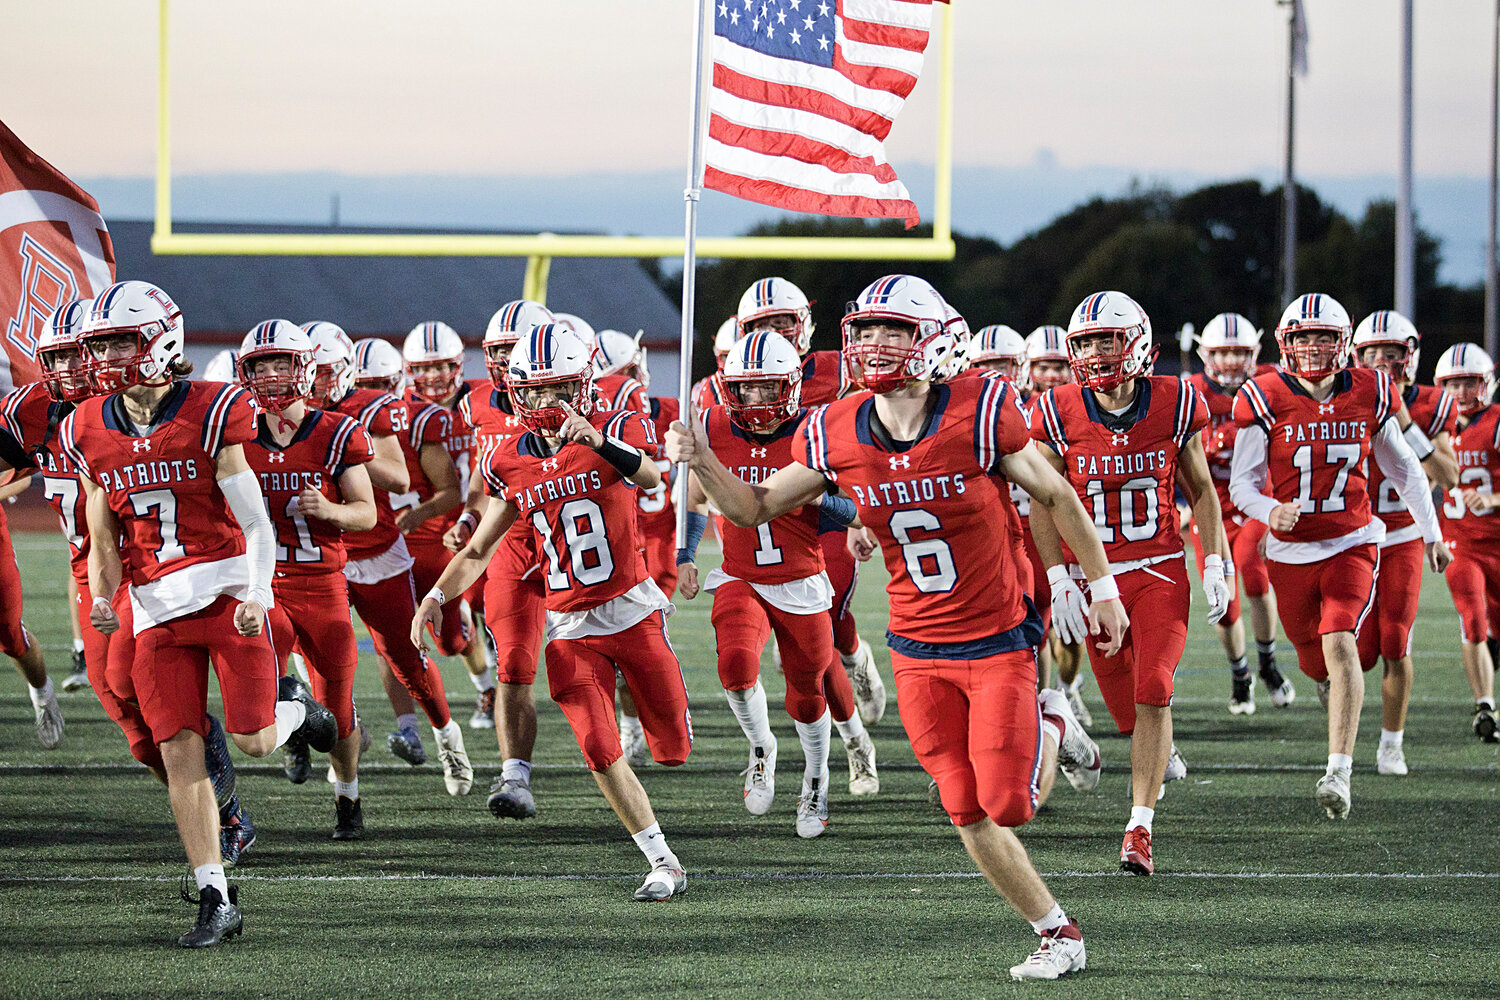 The Portsmouth Patriots varsity football team takes the field before facing Bishop Hendricken in a non-league match at home last Thursday night.